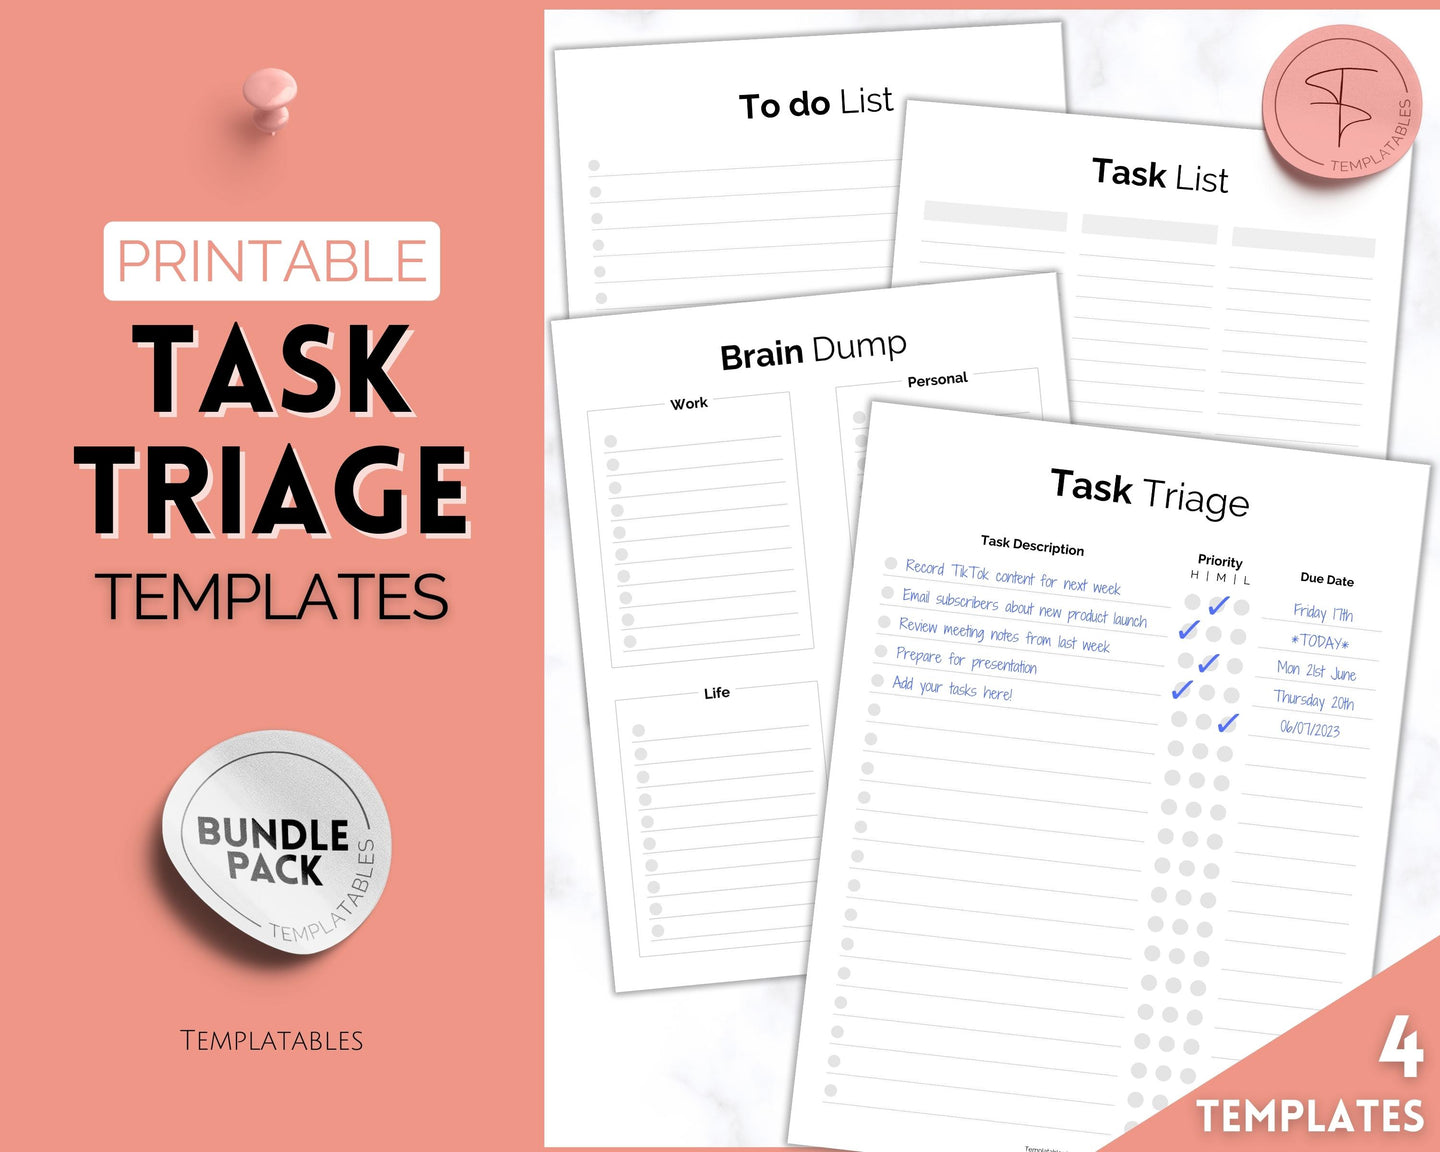 Task Triage: Prioritize and Organize with To-Do List, Brain Dump, and Task Tracker - Printable and Digital Planning Templates | Mono